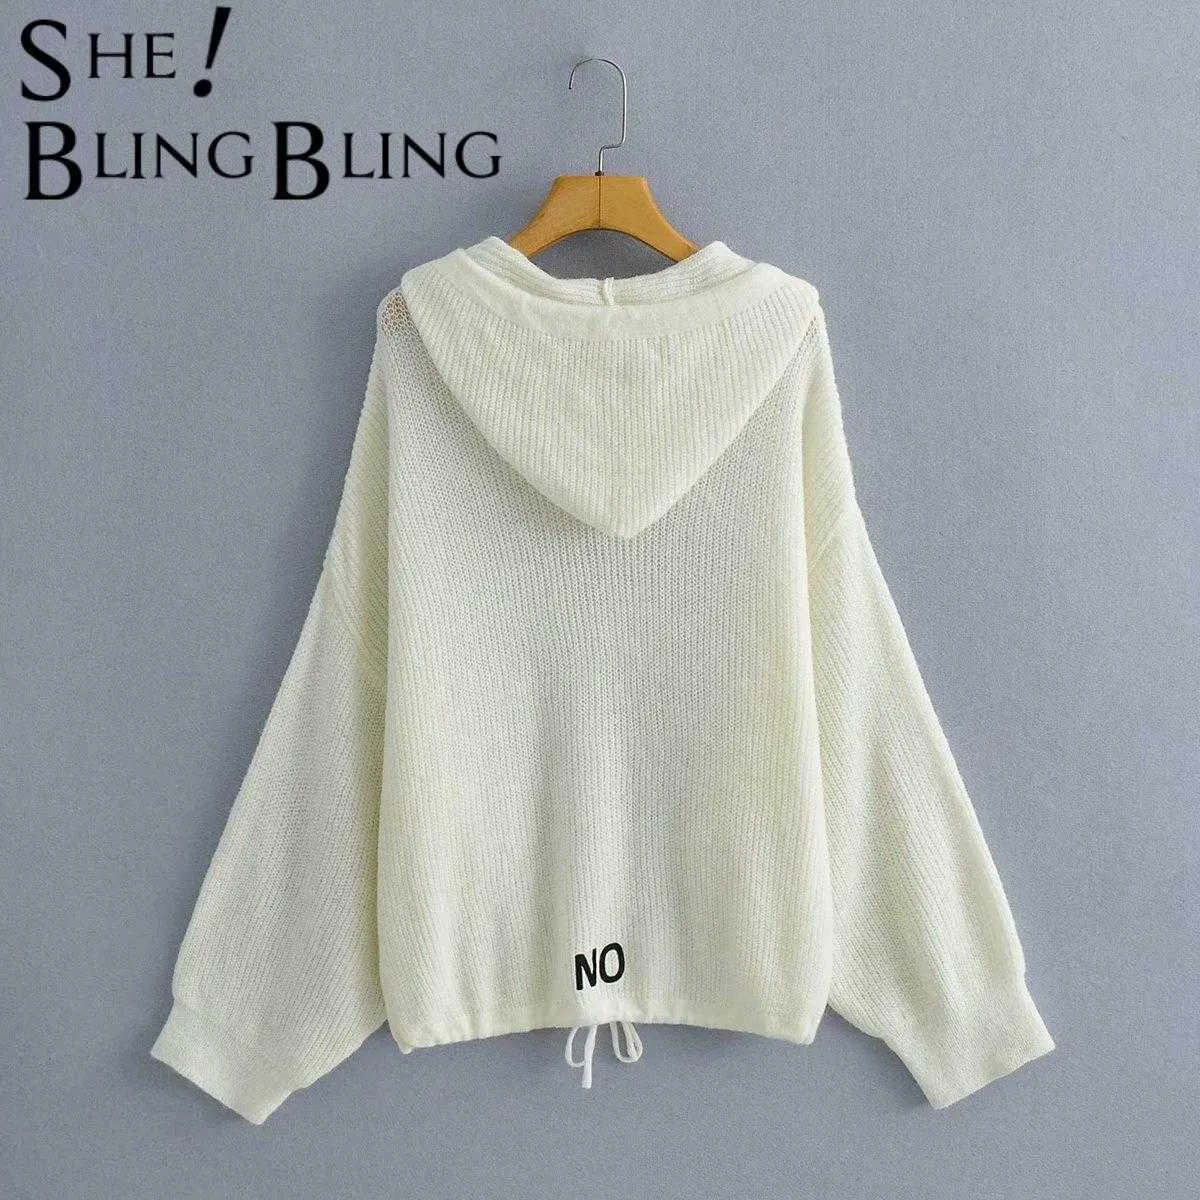 SheBlingBling Za Woman Casual Traf Pull Autumn Embroidery Drawcord Hem Drop Shoulder Knit Jumper Hooded Loose Sweater Femme Coat Y0825